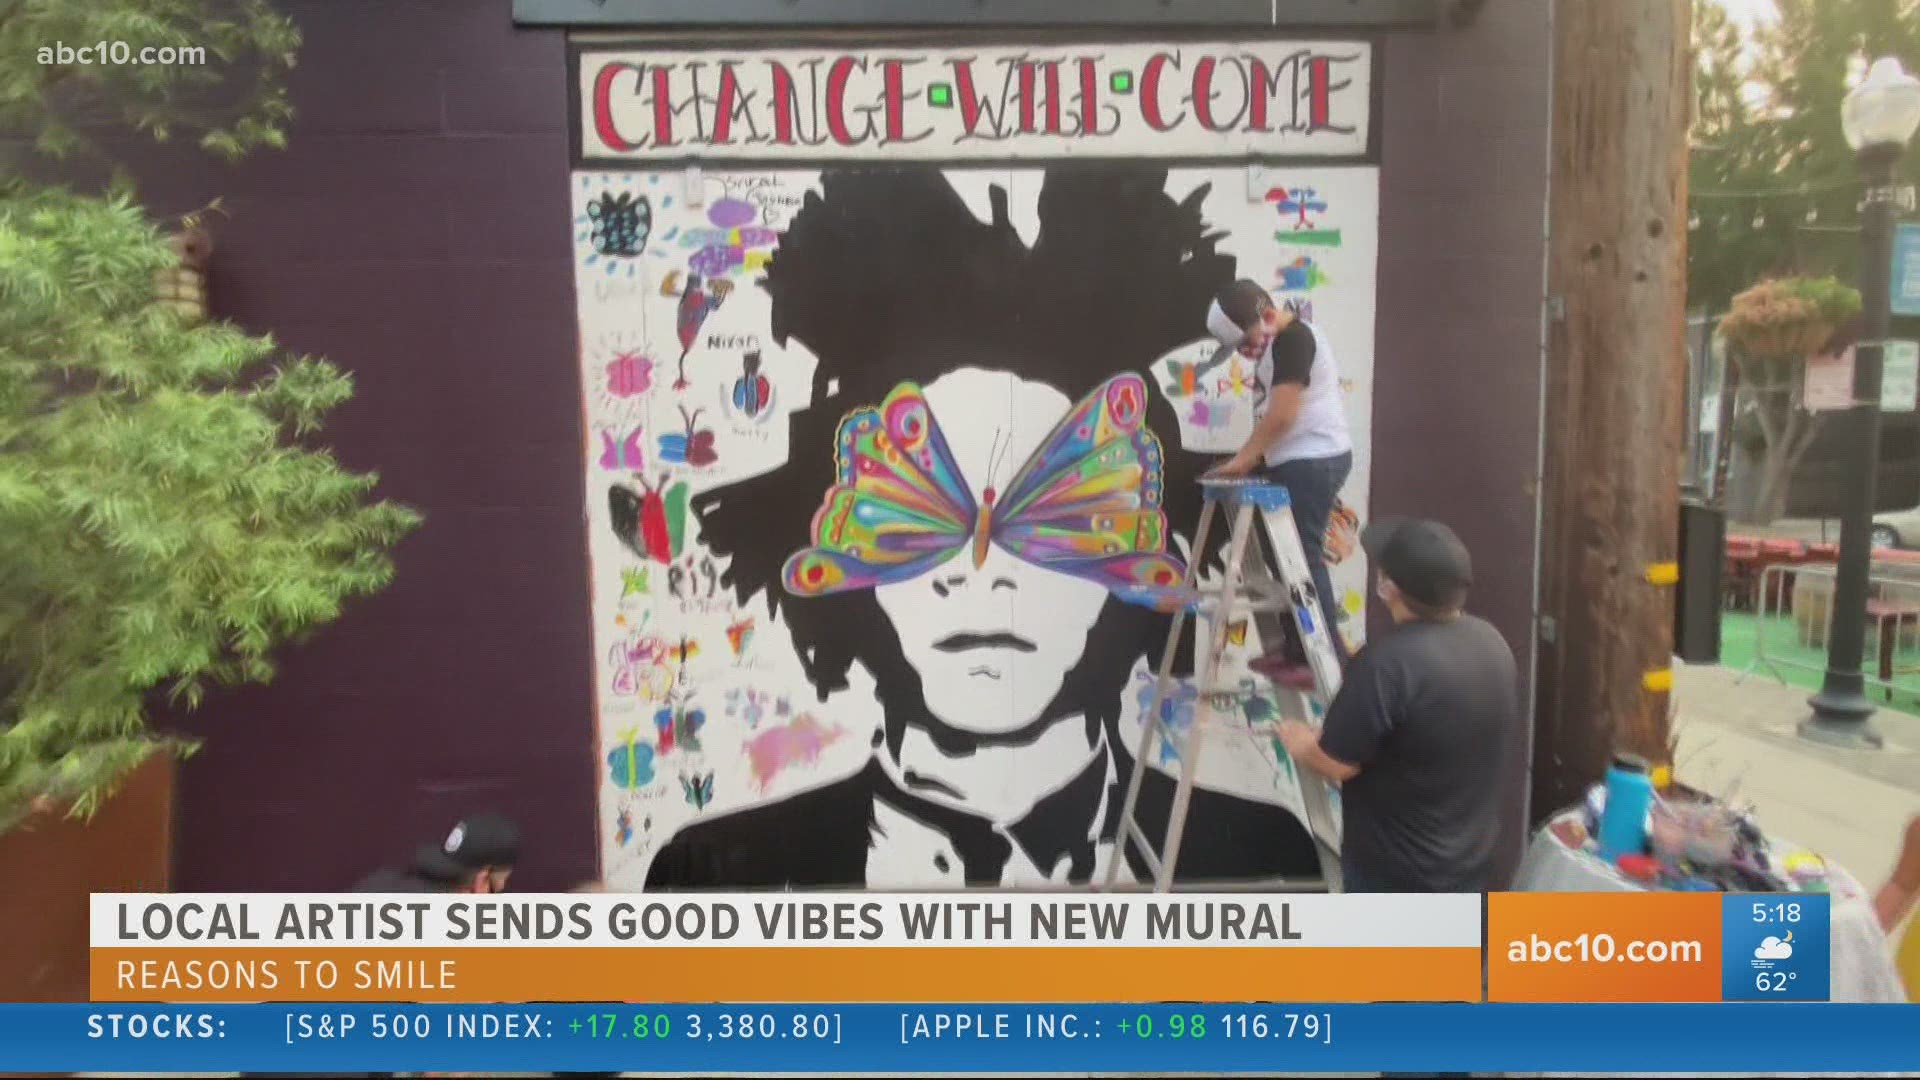 Mark S. Allen spoke with several artists creating murals in downtown Sacramento.